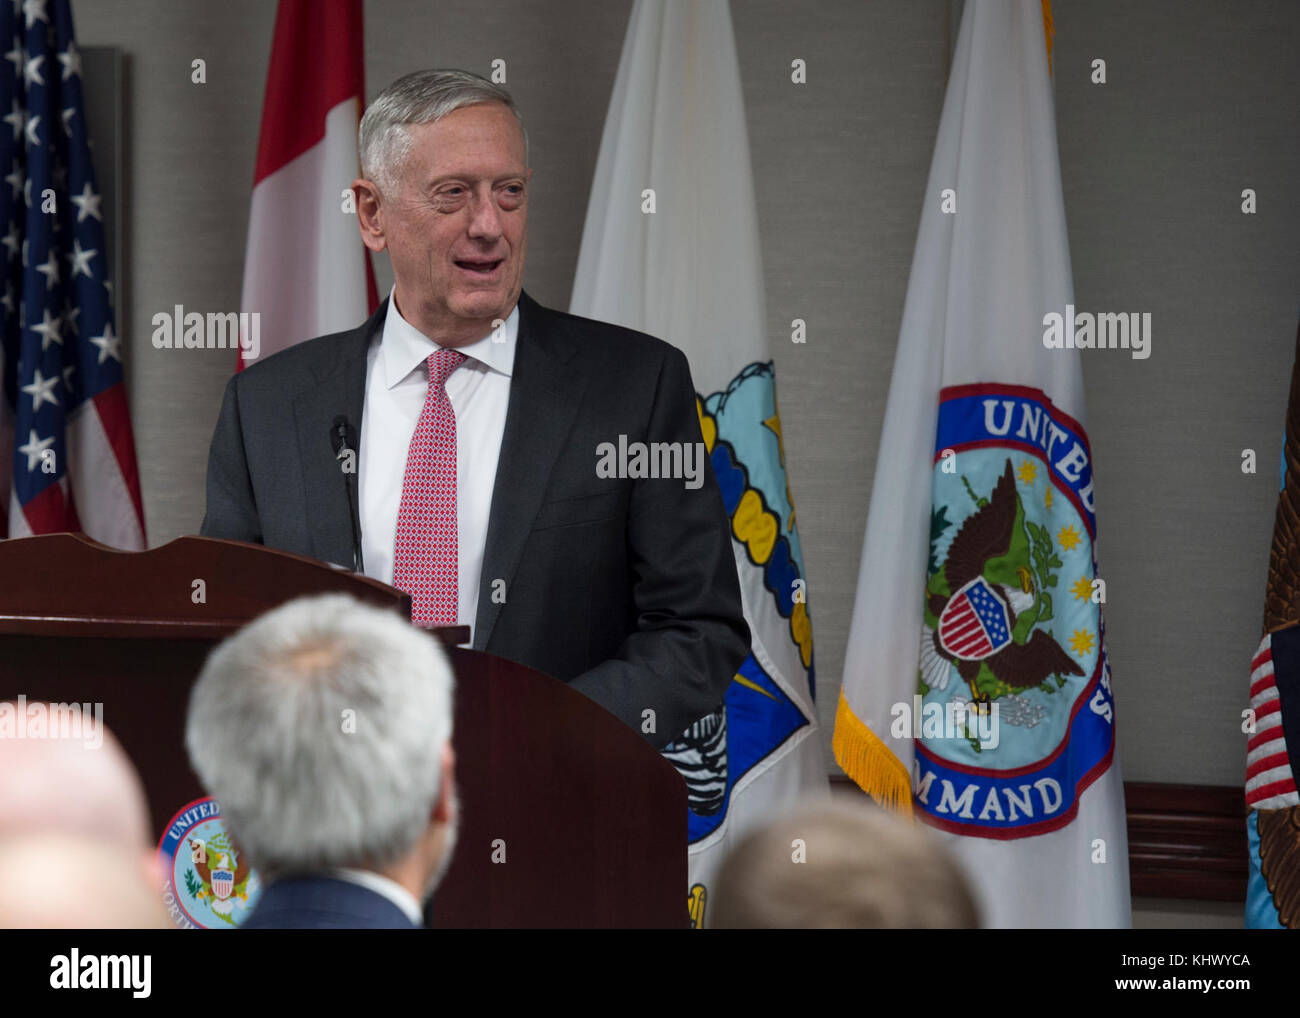 Secretary of Defense, James Mattis answers a question from the audience during an “All Call” held on Peterson AFB, CO, Nov 16, 2017. Secretary Mattis received briefings on the current missions of the commands and the unique nature of the two commands that are responsible for the defense of the United States and Canada. (DoD Photo By: N&NC Public Affairs) Stock Photo